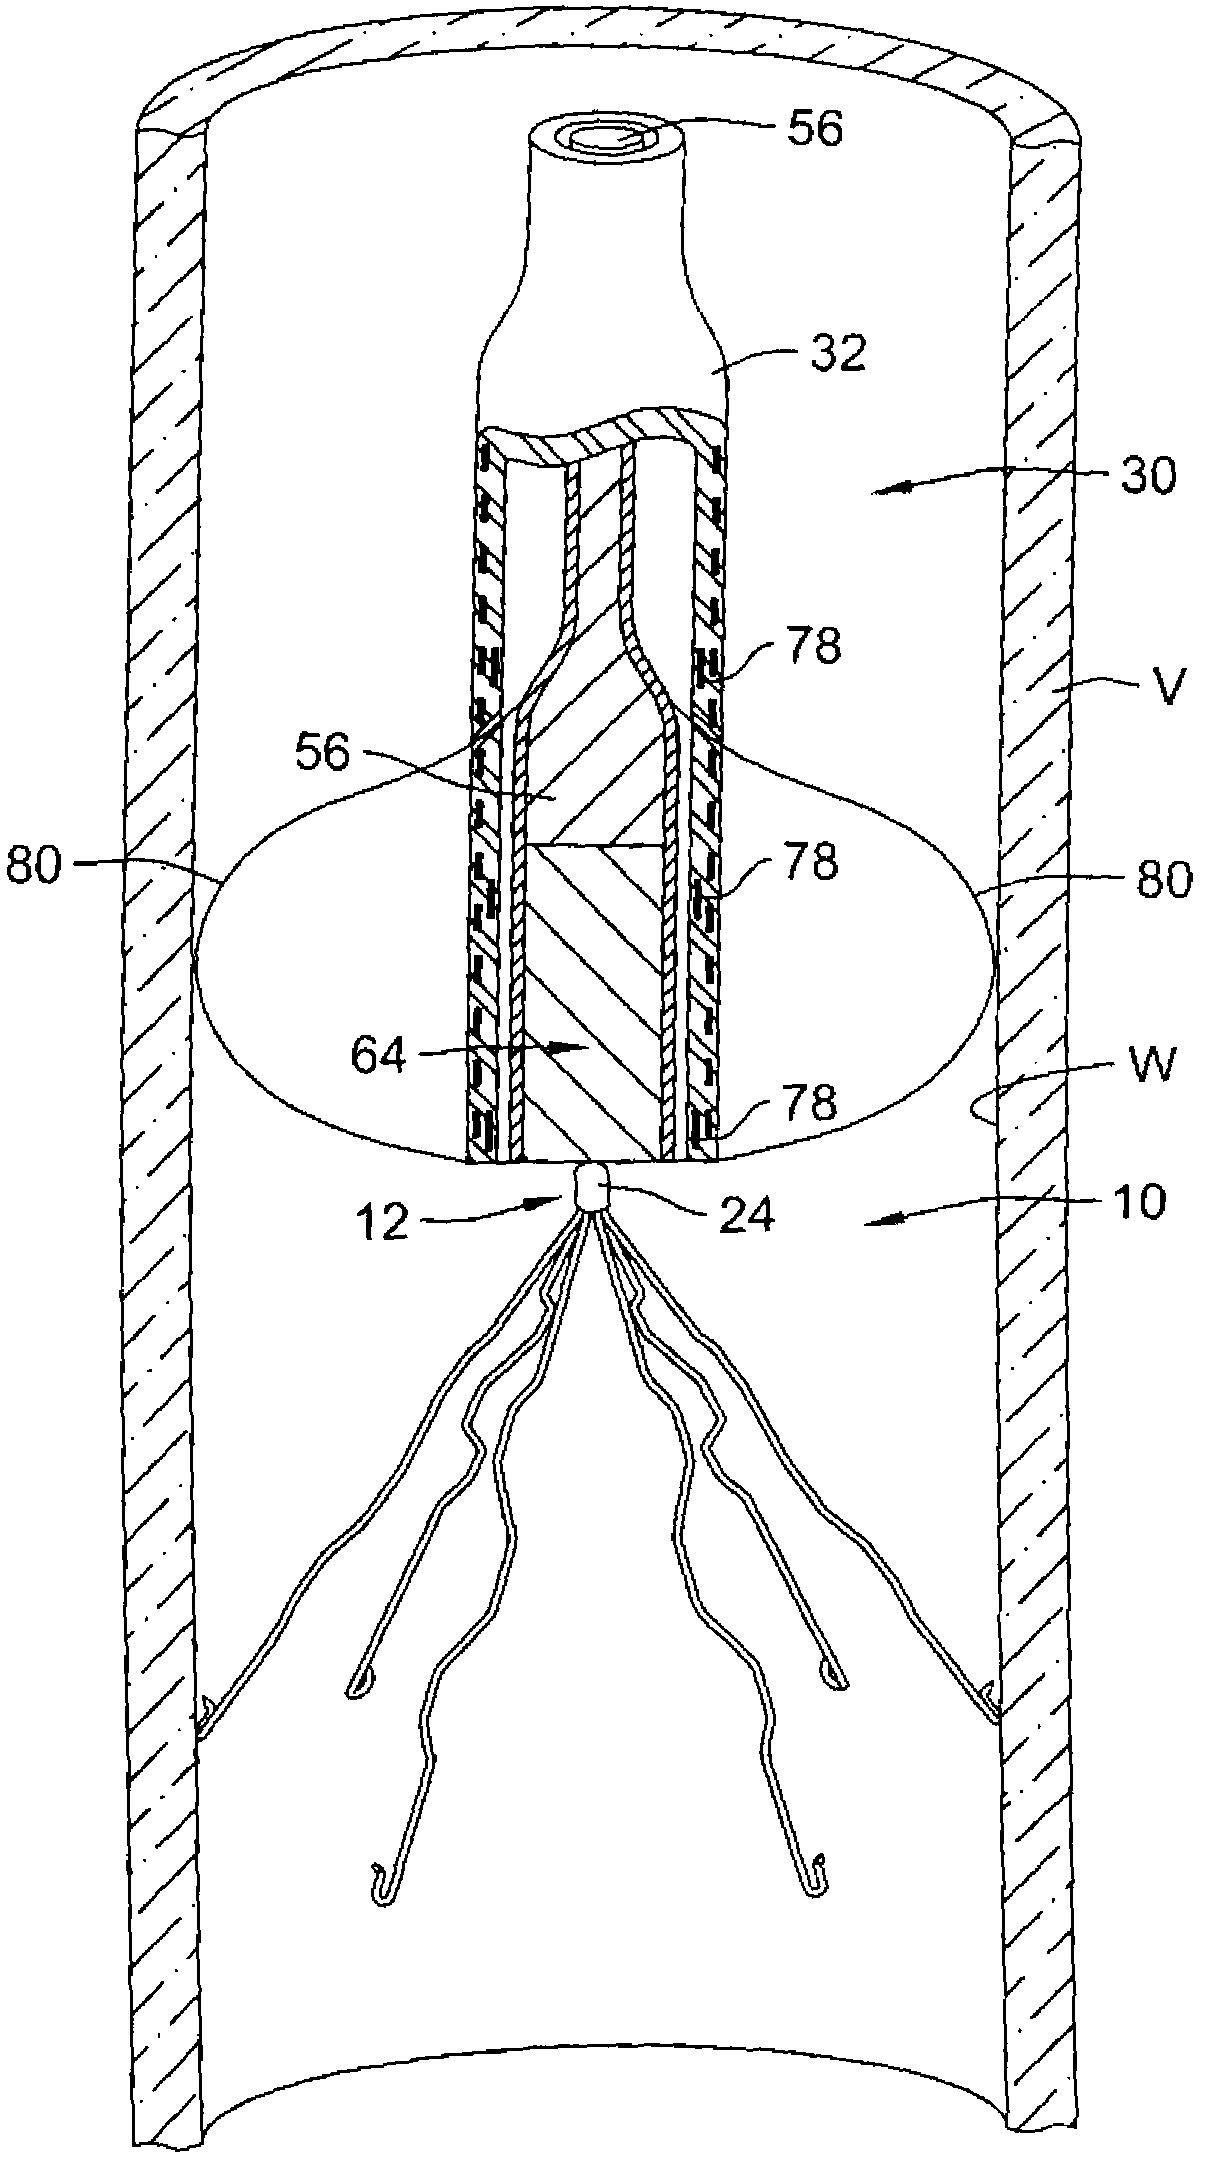 Devices and methods for magnetically manipulating intravascular devices